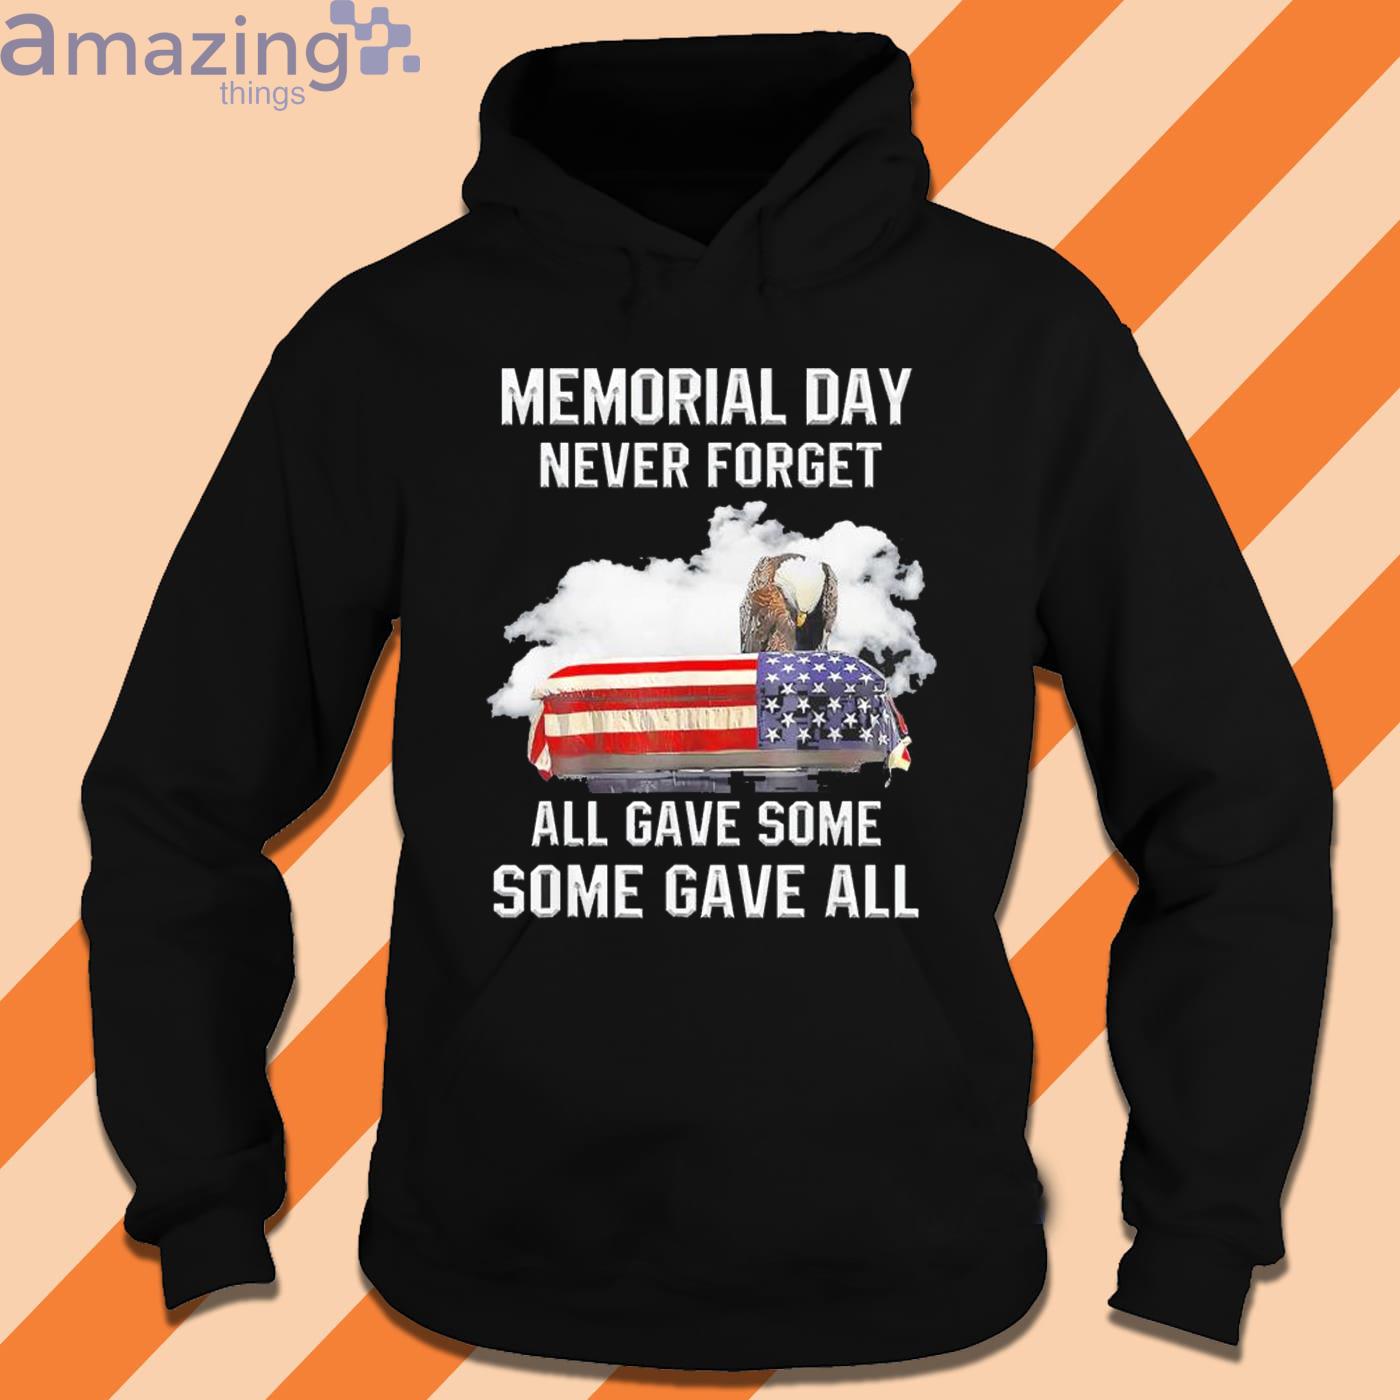 Memorial Day 911  Never Forget All Gave Some Some Gave All Shirt Product Photo 1